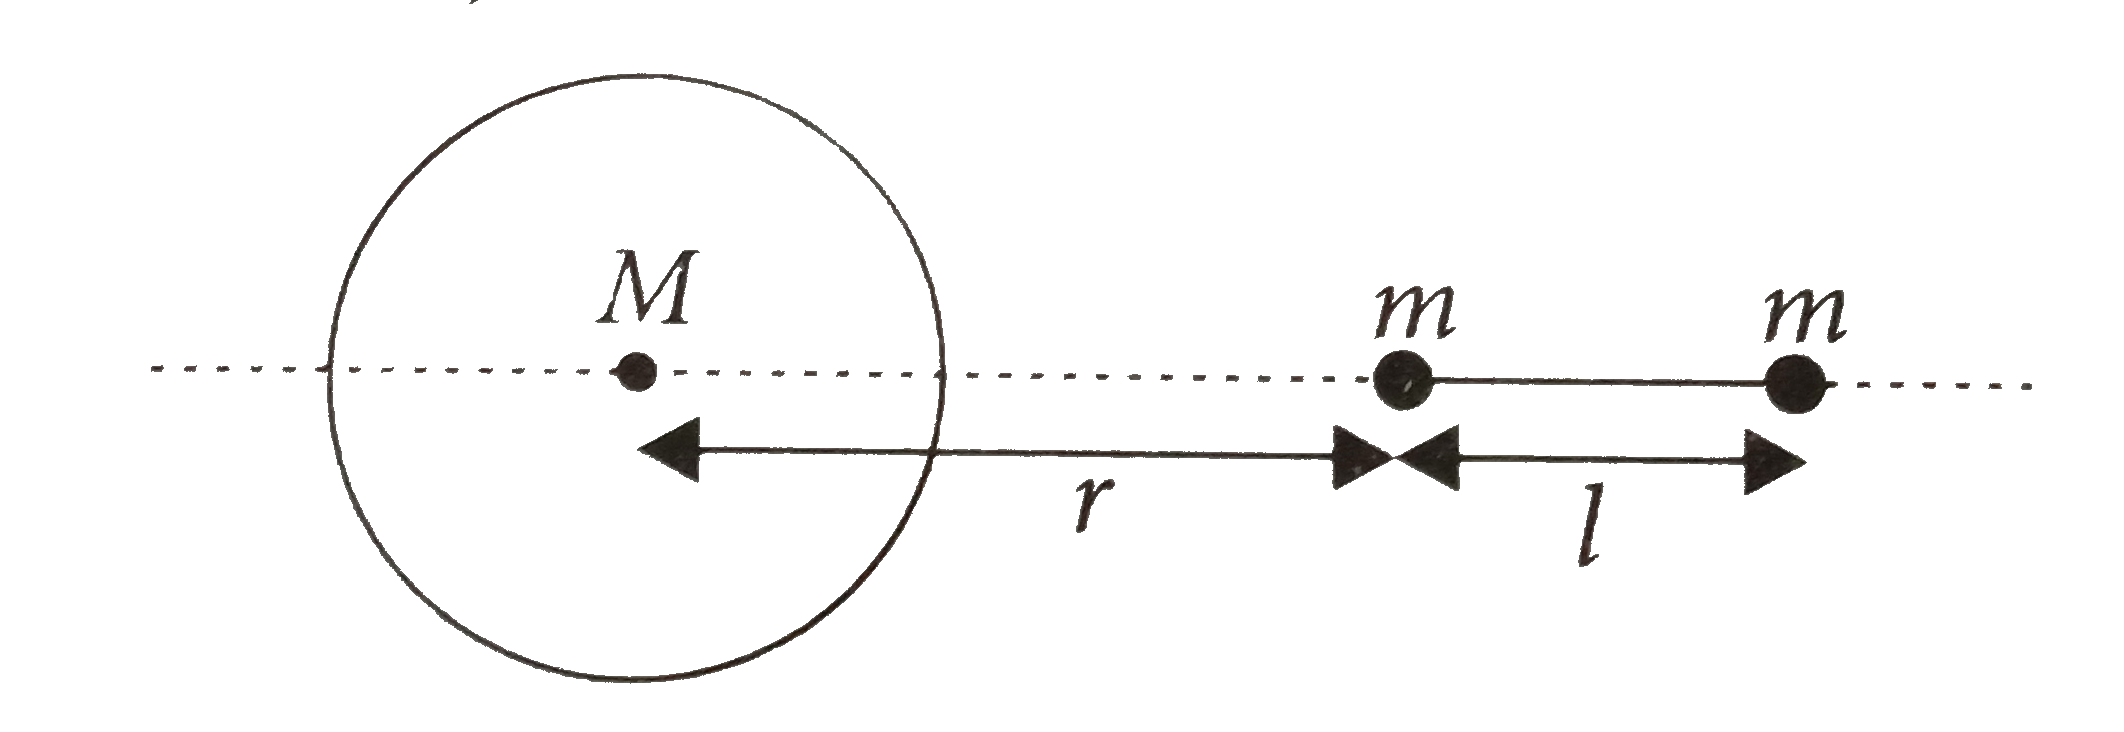 A large spherical mass M is fixed at one position and two identical point masses m are kept on a line passing through the centre of M (see figure ). The point masses are connected by a rigid massless rod of length l and this assembly is free to move along the line connecting them. All three masses interact only through their mutual gravitational  interaction. When the point mass nearer to M is at a distance r=3l from M, the tension in the rod is zero for m=k((M)/(288)). The value of k is